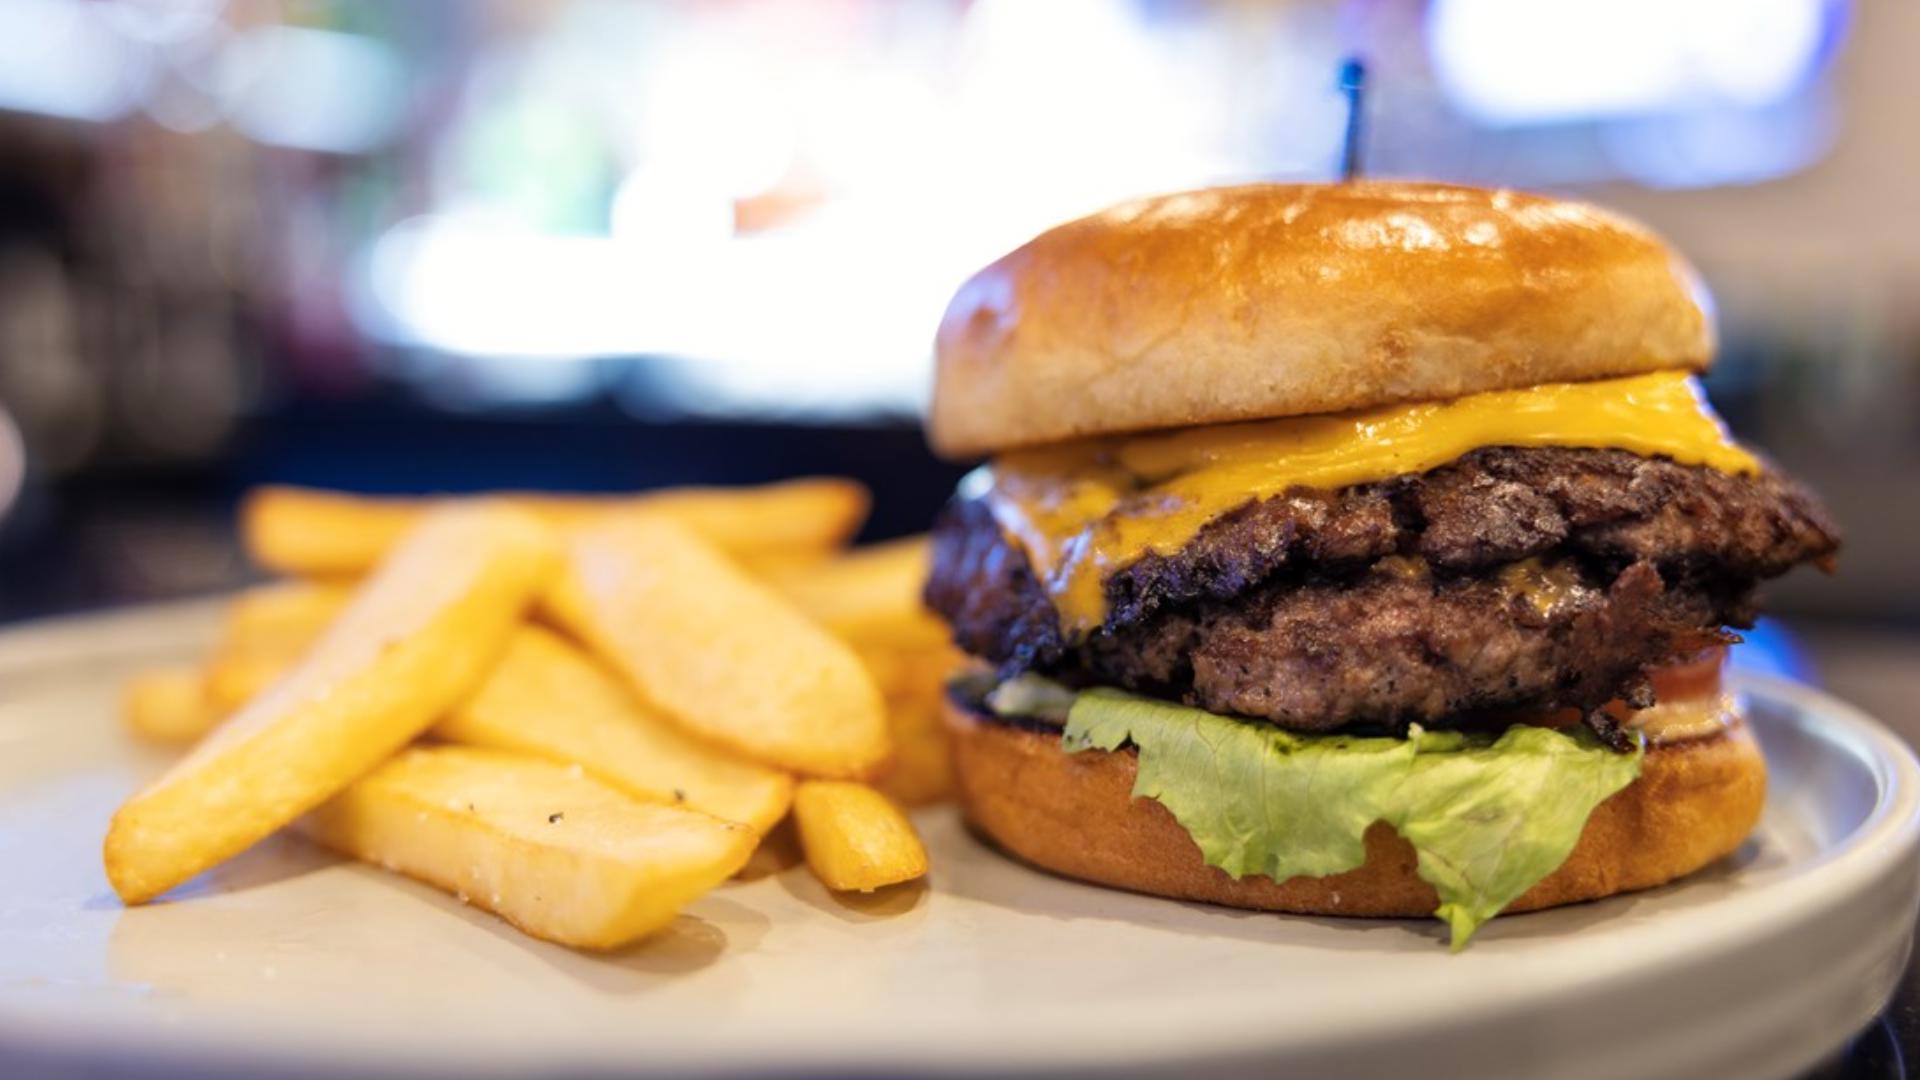 The JJ Smash Burger is a tasty combination of beef, tavern sauce, American cheese, lettuce, red onion and pickle.